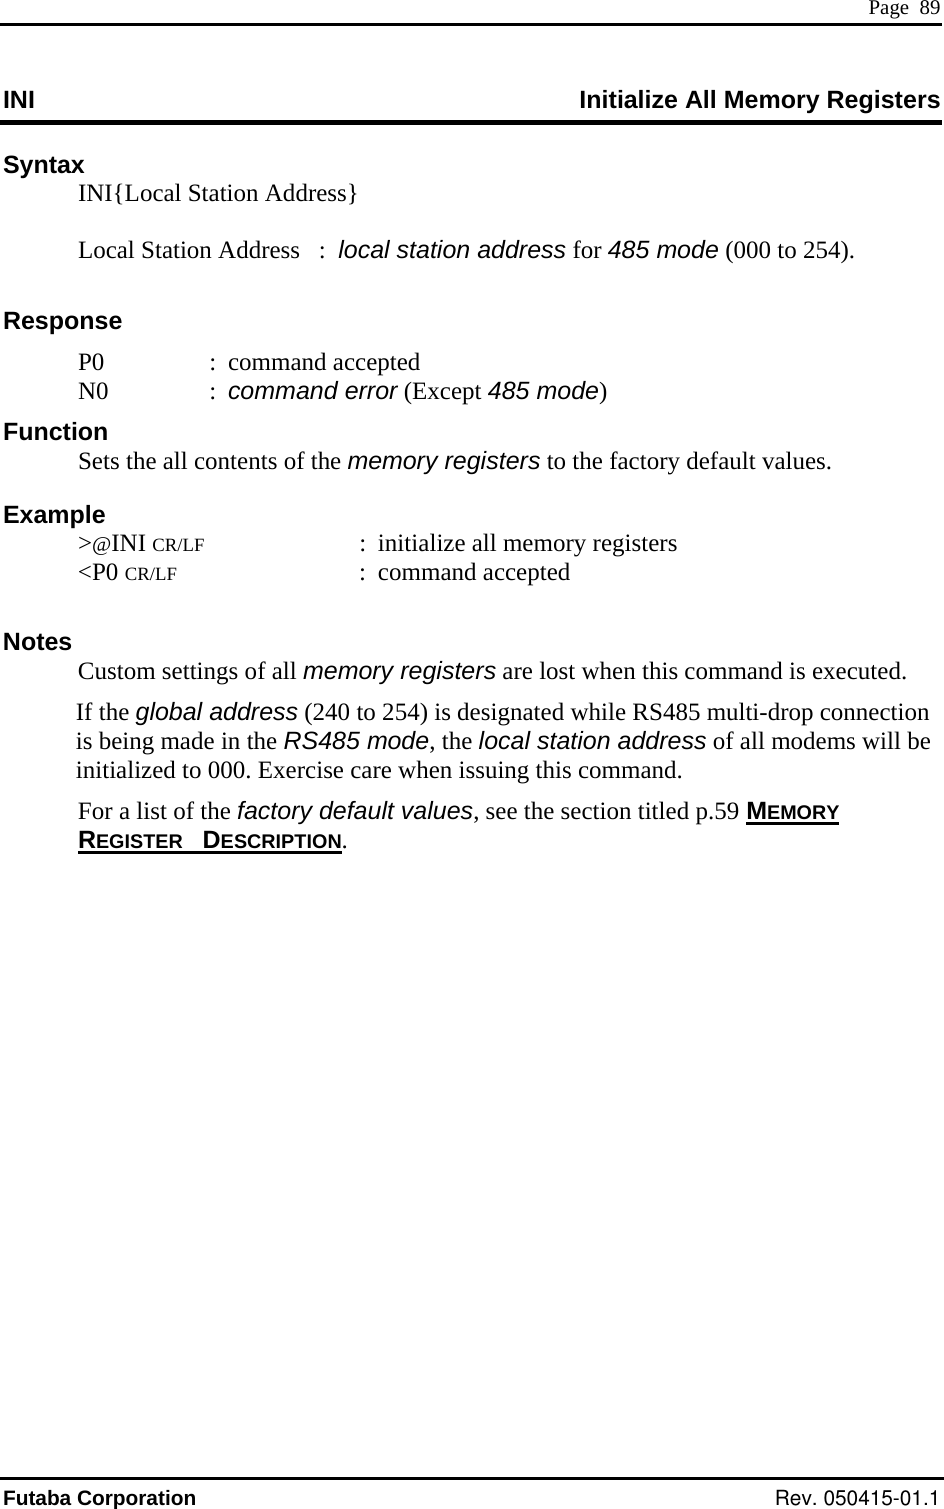  Page  89 INI  All Memory Registers Initialize Syntax   INI{Local Station Address}      Local Station Address   :  local station address for 485 mode (000 to 254).  Response  P0  : command accepted  N0  : command error (Except 485 mode) egisters otes  ss (240 to 254) is designated while RS485 multi-drop connection  of all modems will be initialized to 000. Exercise care when issuing this command.   For a list of the factory default values, see the section titled p.59 MEMORY Function   Sets the all contents of the memory registers to the factory default values. Example  &gt;@INI CR/LF  :  initialize all memory r &lt;P0 CR/LF : command accepted  N  Custom settings of all memory registers are lost when this command is executed. If the global addreis being made in the RS485 mode, the local station addressREGISTER DESCRIPTION. Futaba Corporation Rev. 050415-01.1 